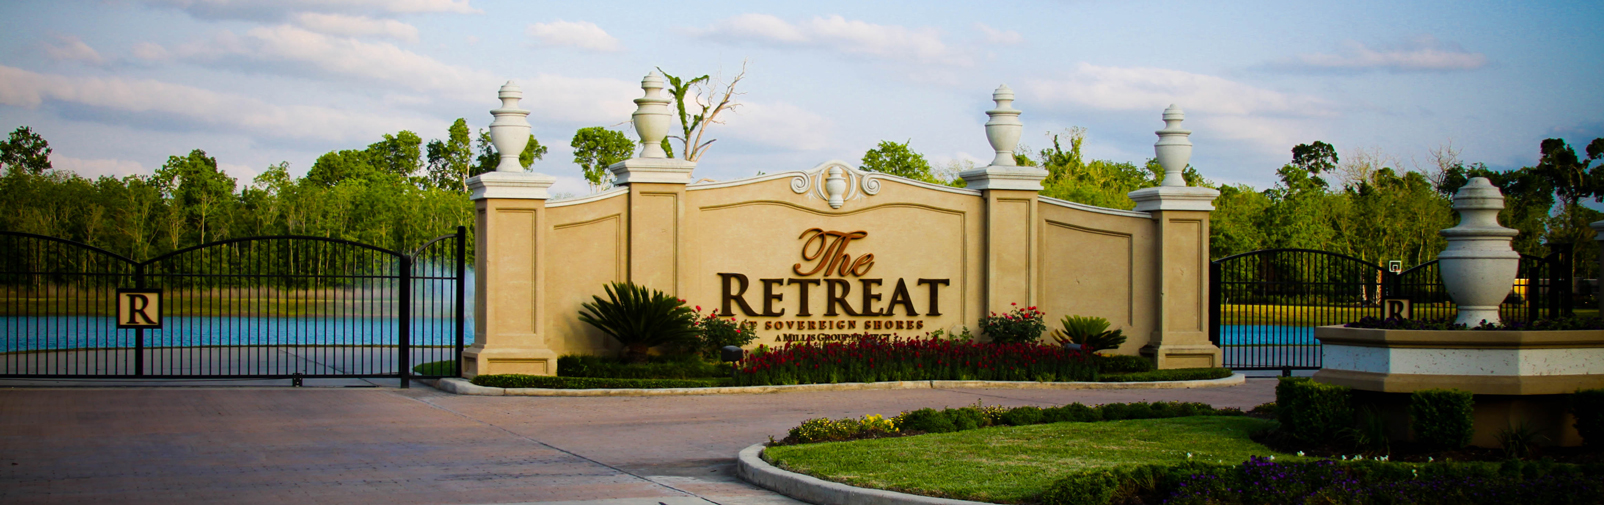 The Retreat at Sovereign Shores